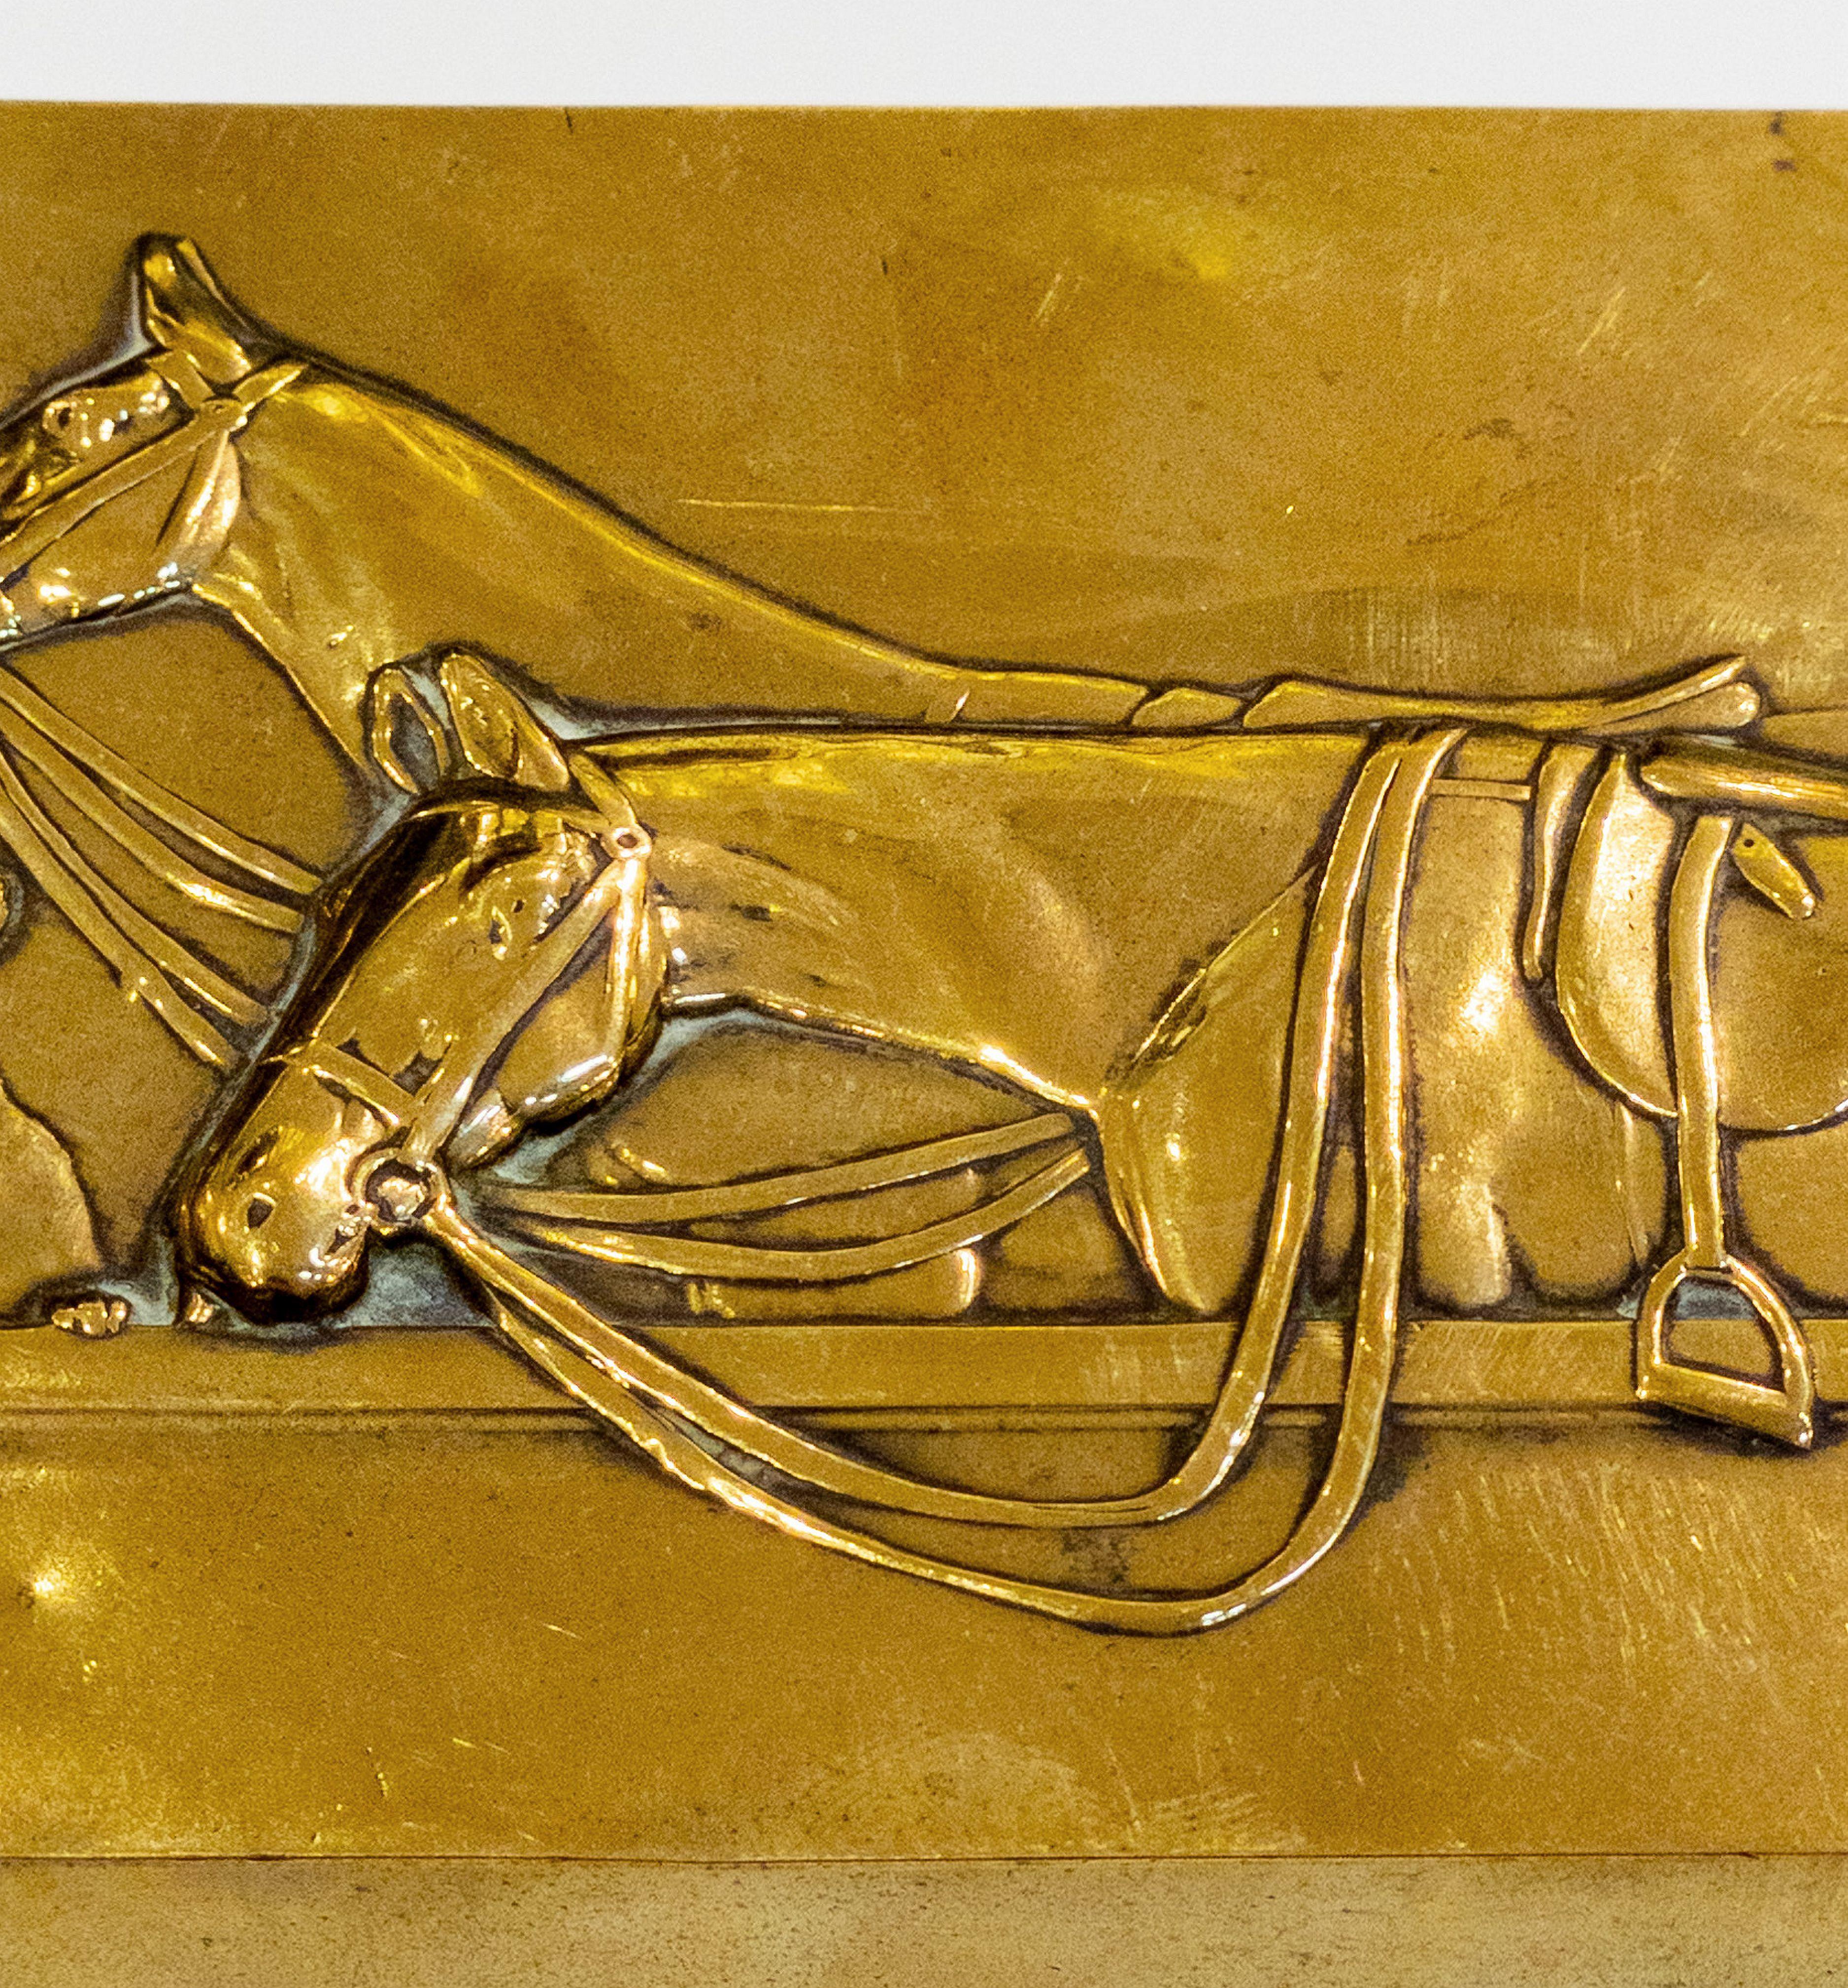 A fine English wood-lined brass cigarette or tobacco box, featuring an embossed lid with a scene of two horses with a hound or dog.